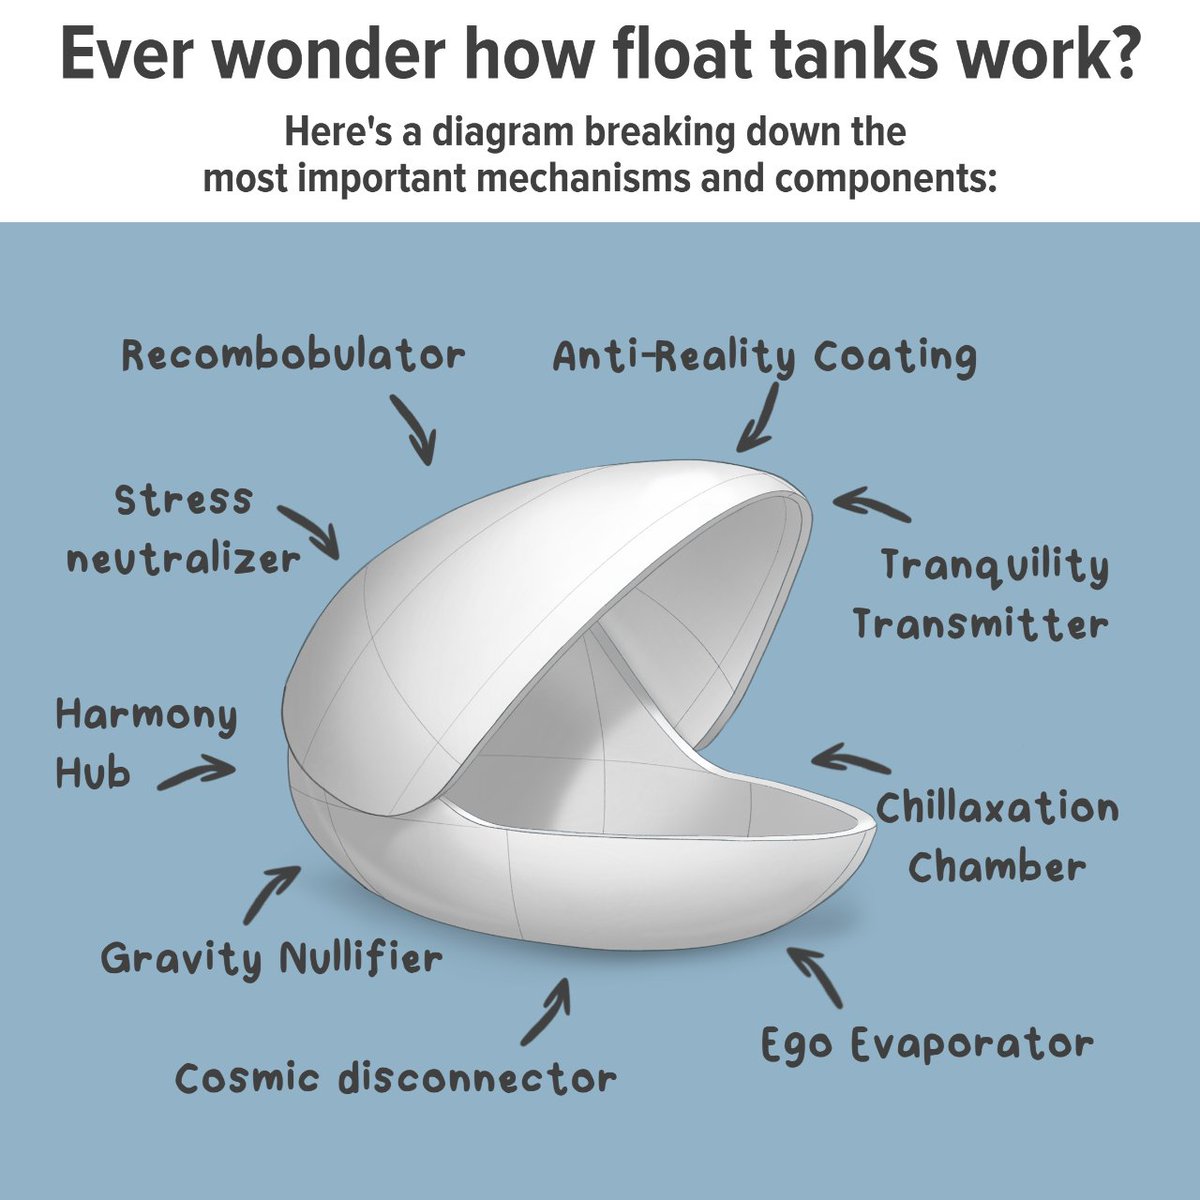 Here’s a special behind-the-scenes look at the inner workings of float tanks. #floating #selfcare #mindfulness #rest #recovery #relax #meditation #selfcaretips  #love #happiness #mentalhealth #healthyliving